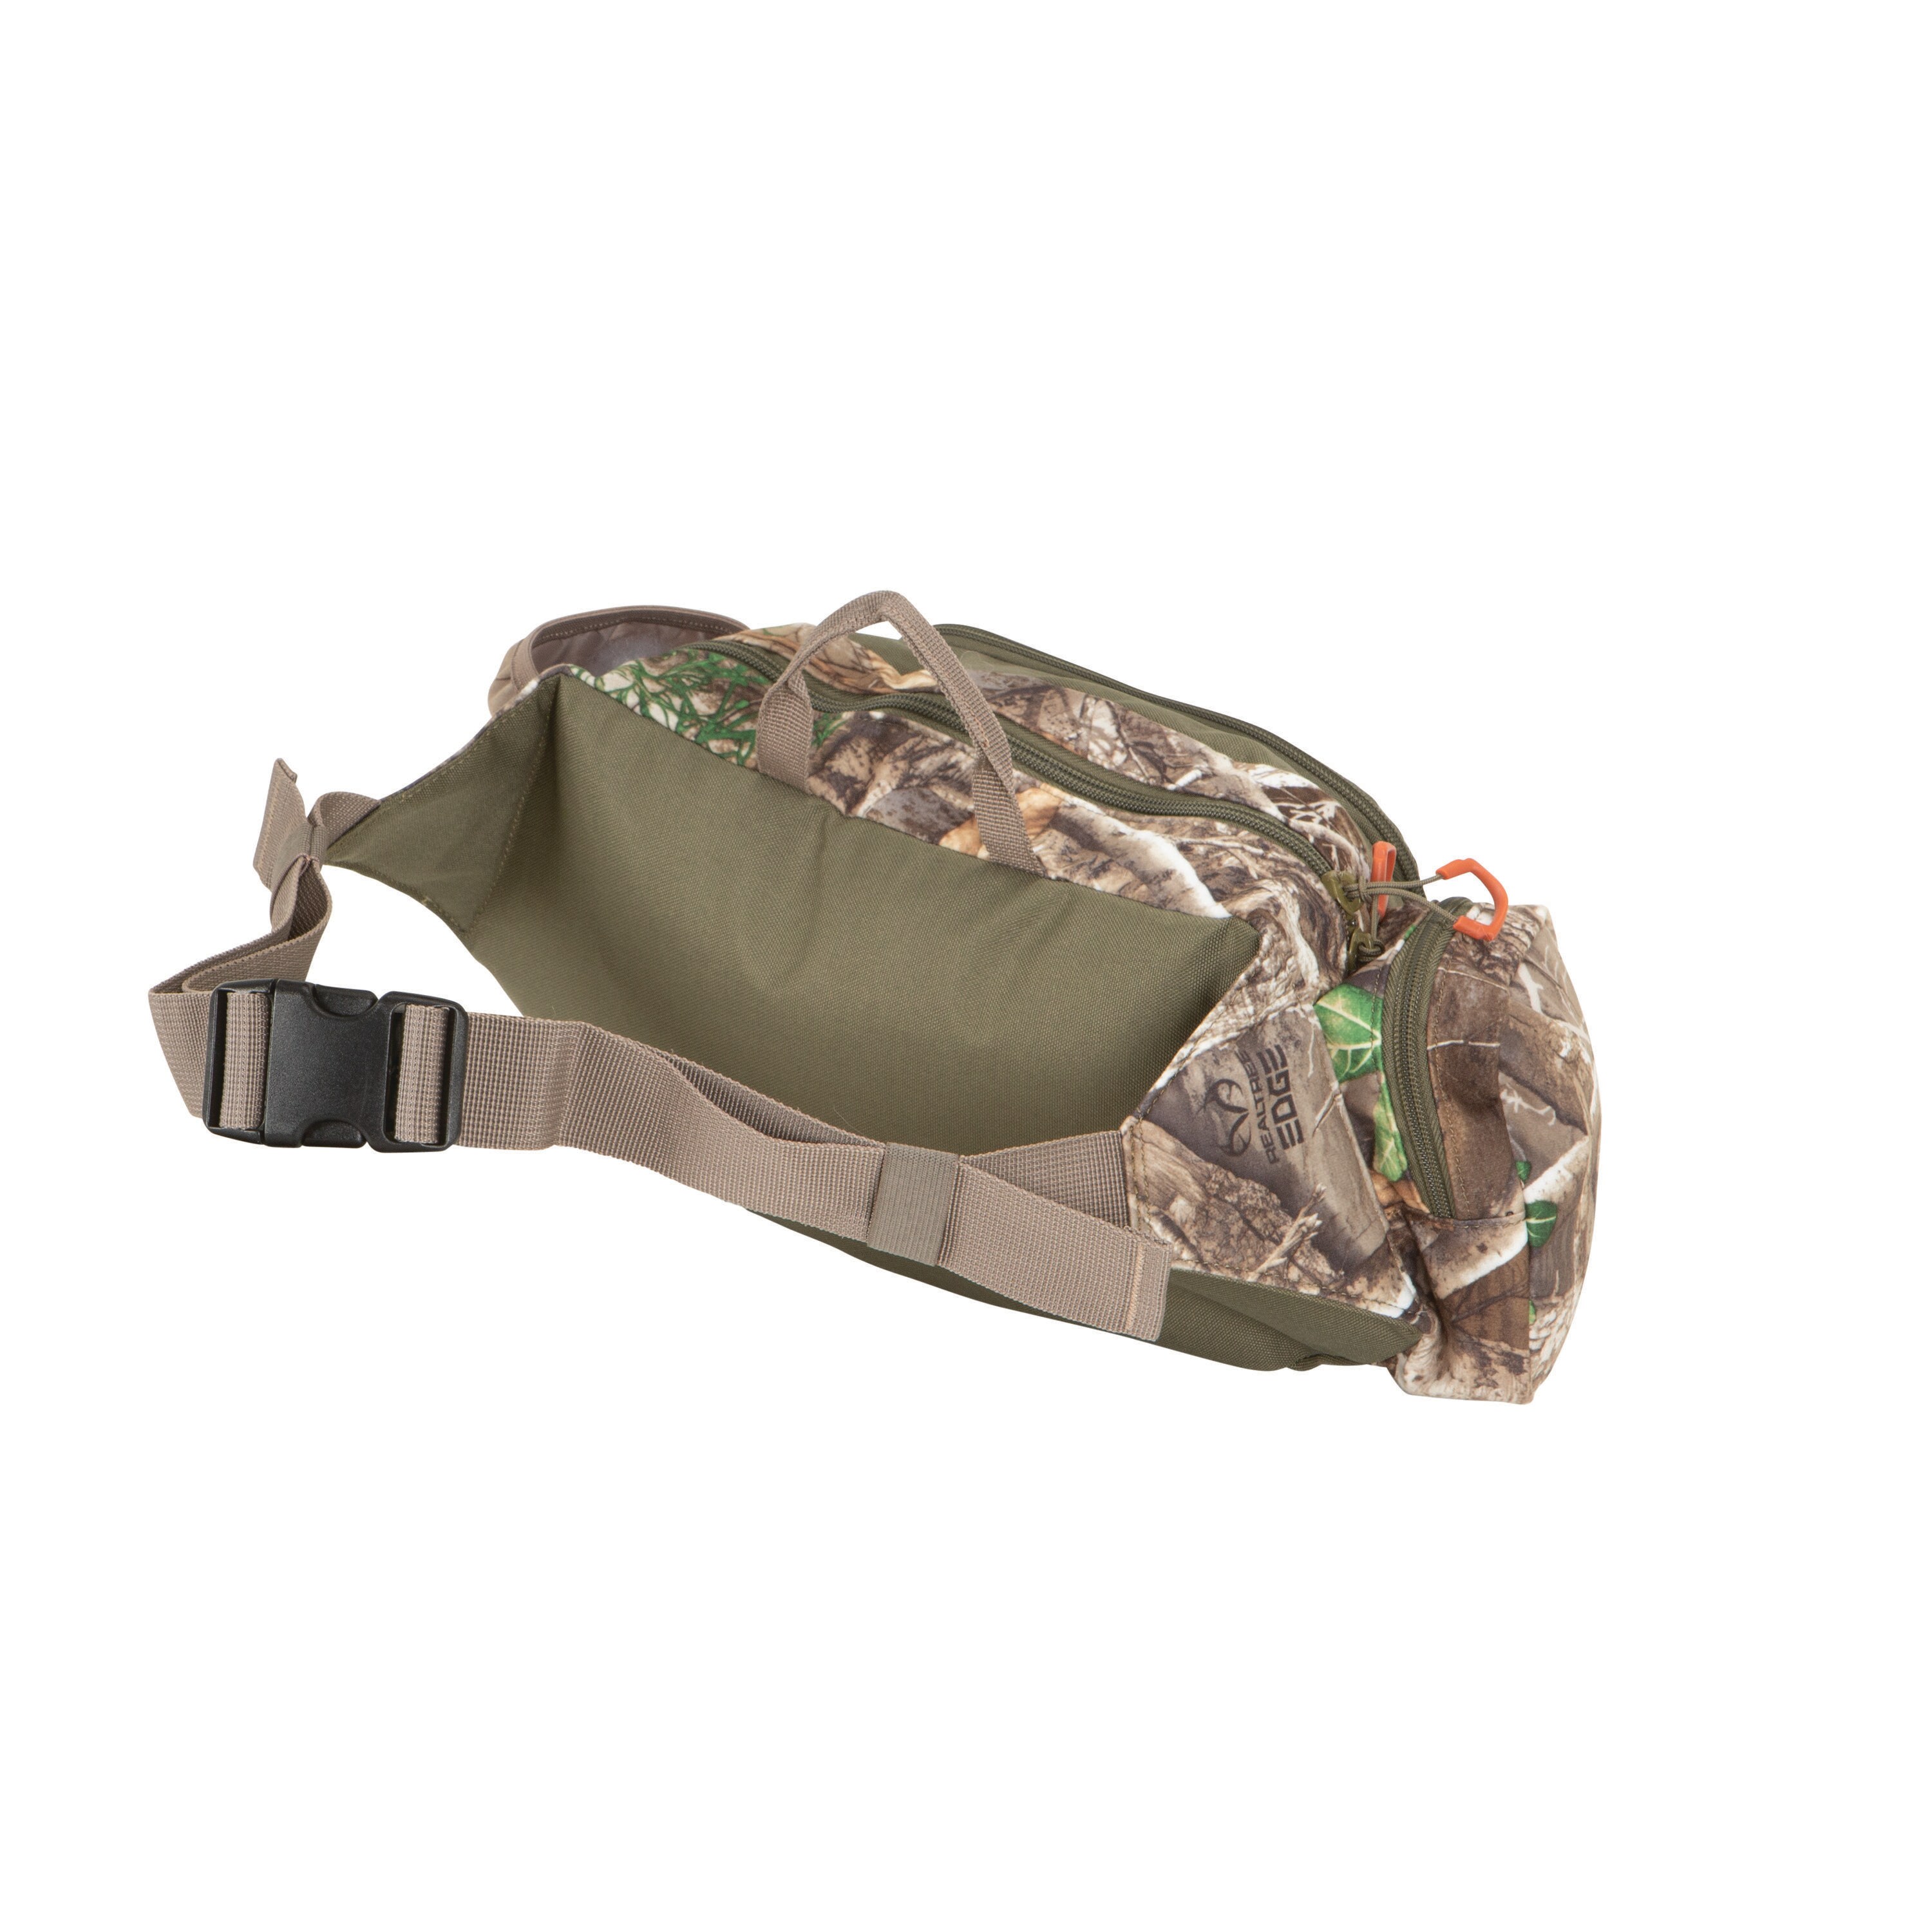 Terrain Allen Company Hunting Bag, 600 Cubic Inch Capacity, Four